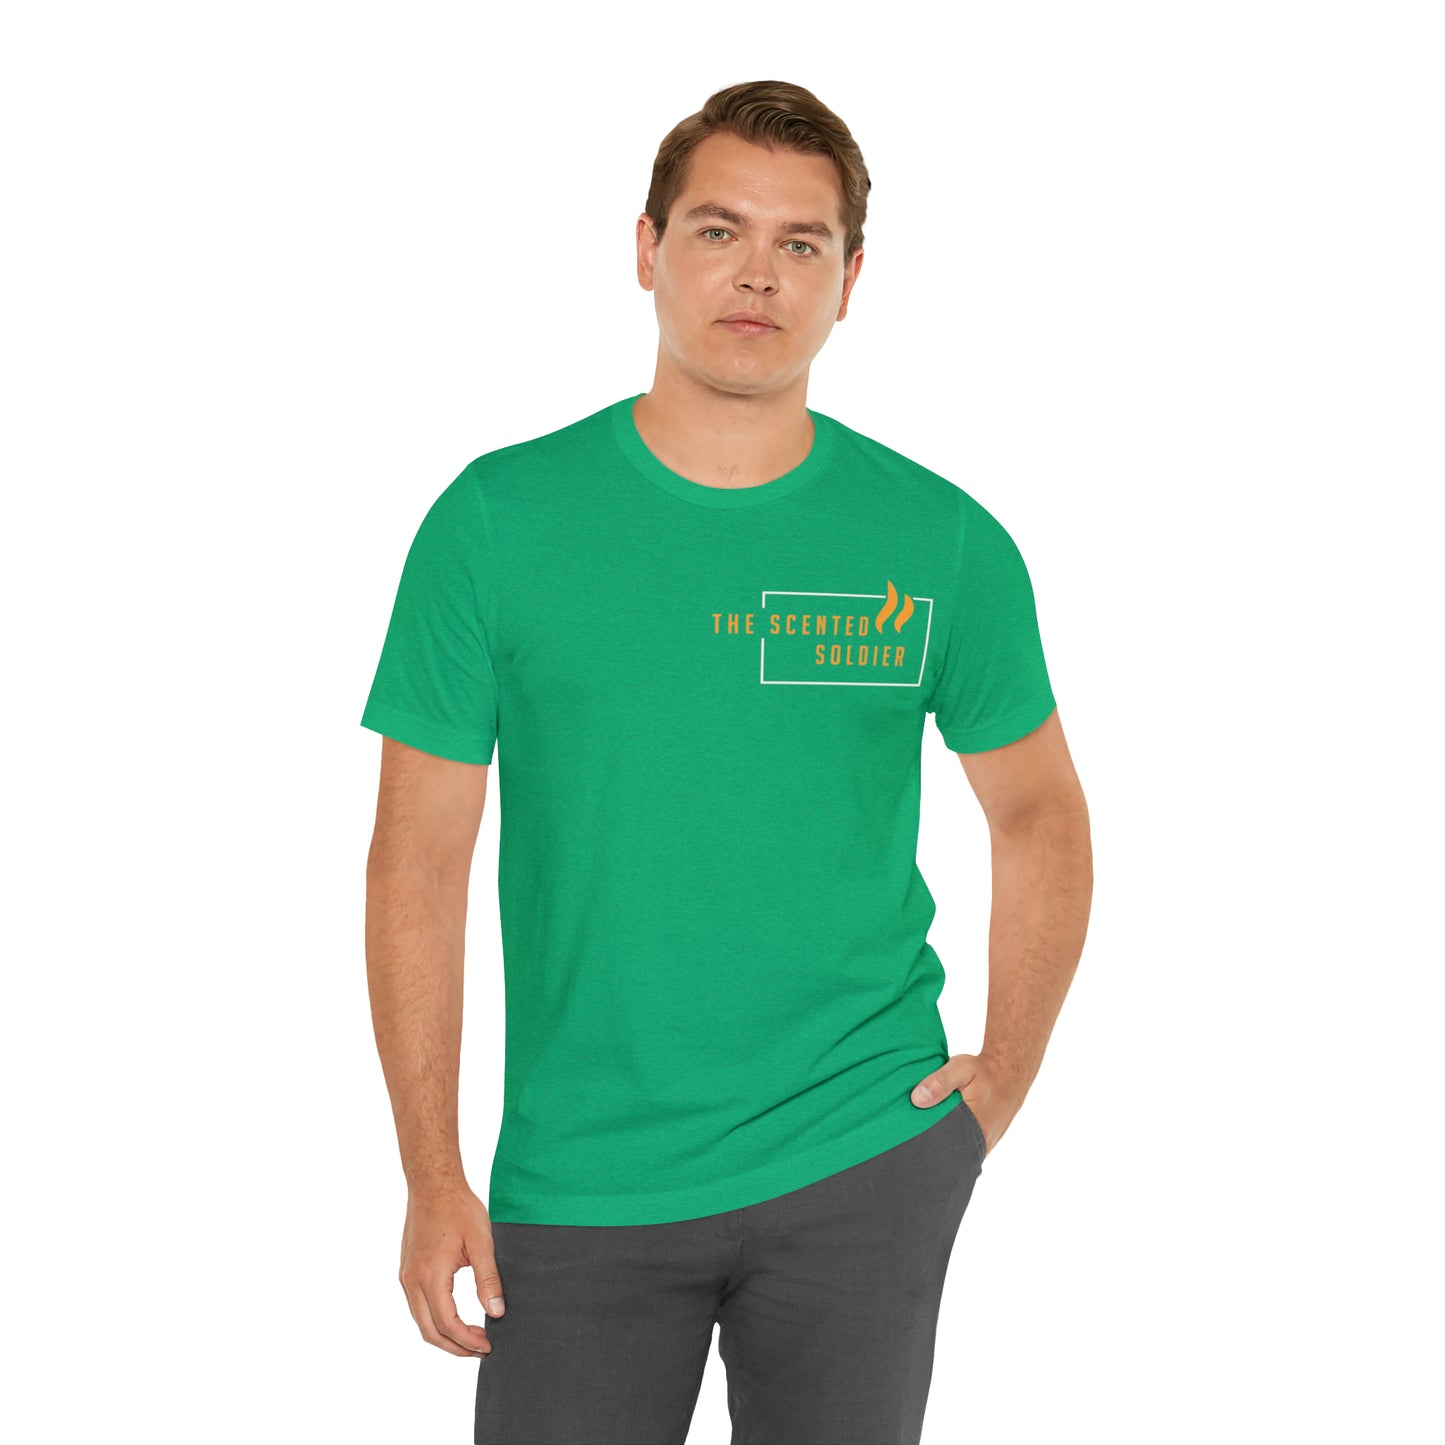 The Scented Soldier Unisex Jersey Short Sleeve Tee